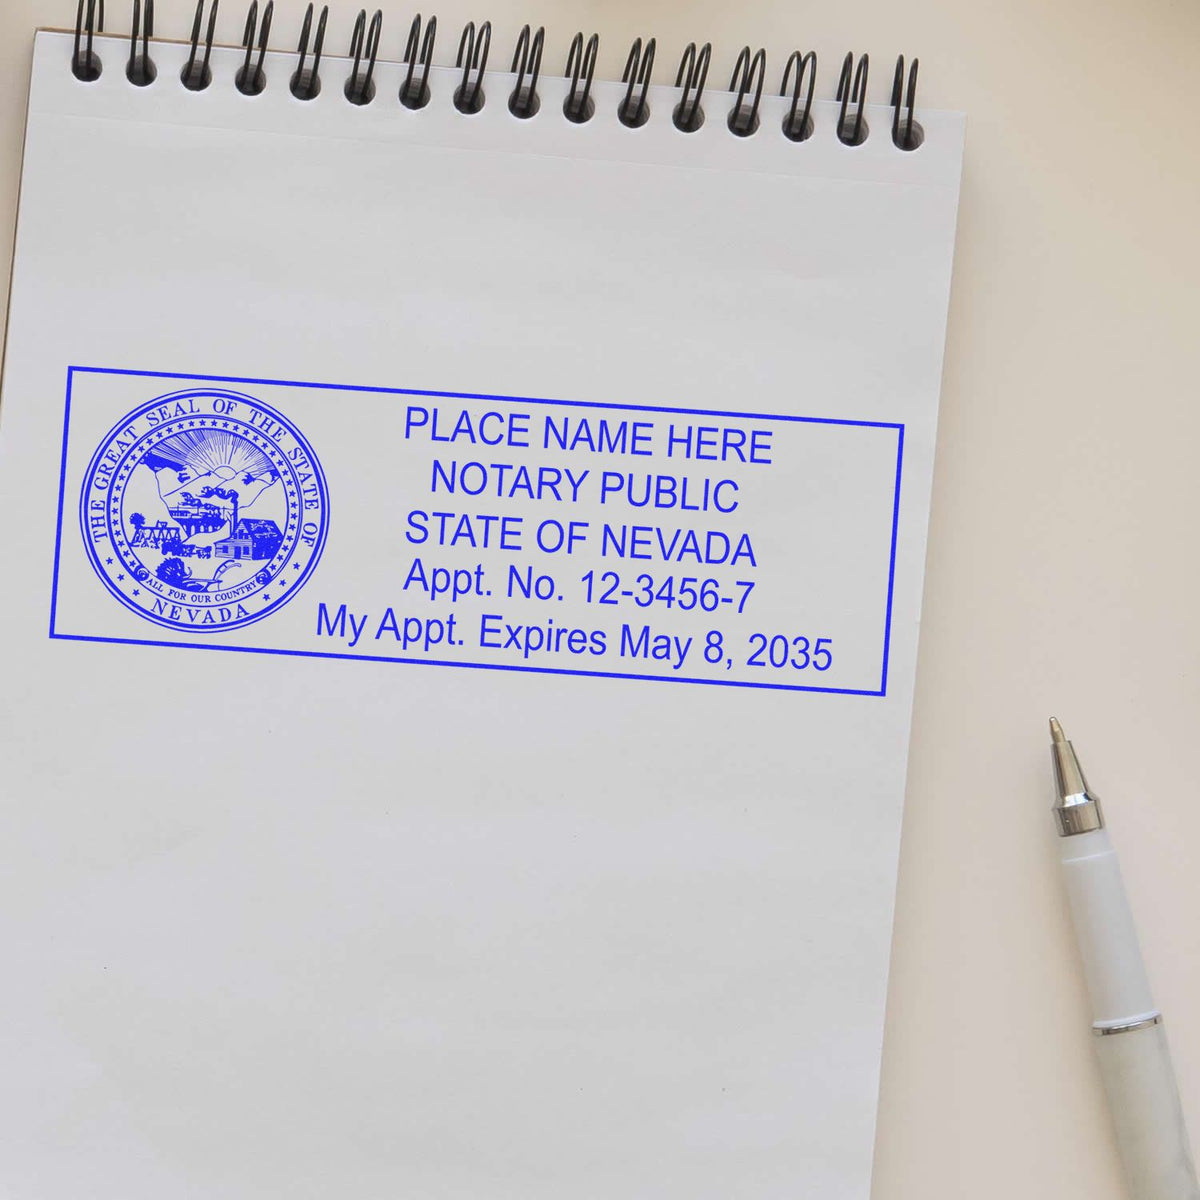 This paper is stamped with a sample imprint of the Wooden Handle Nevada State Seal Notary Public Stamp, signifying its quality and reliability.